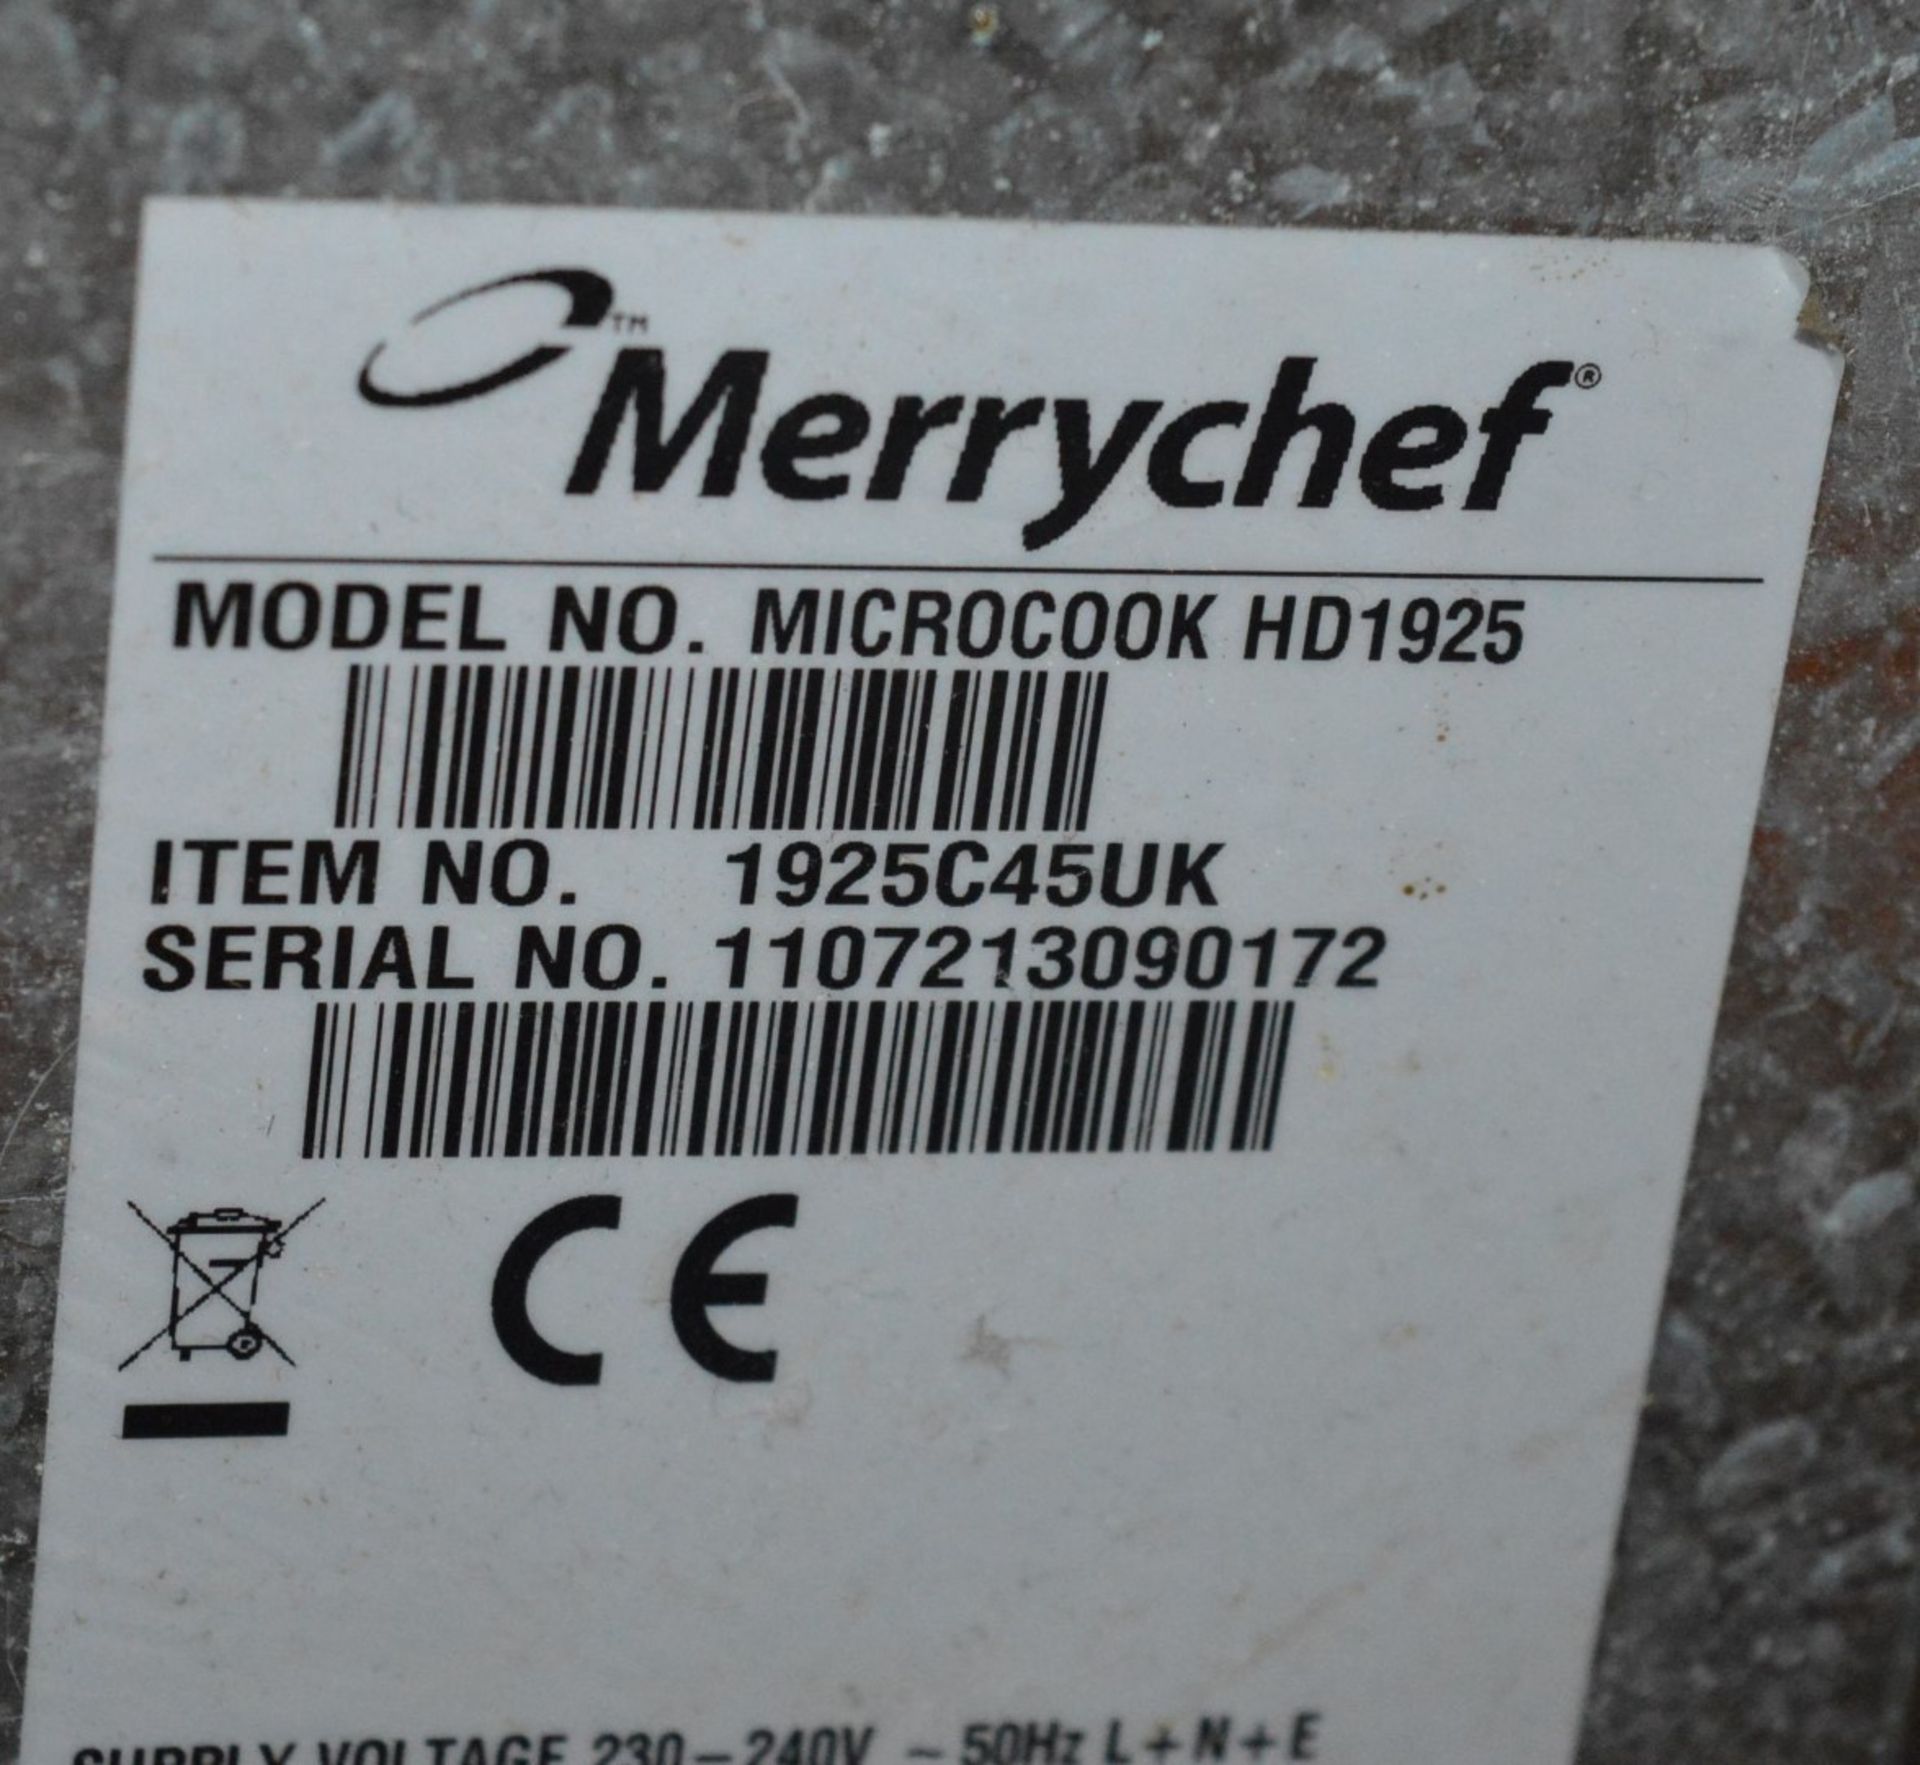 1 x Merrychef Microcook HD1925 - CL232 - Ref JP517 - Locaton: Bolton BL1 This item was removed - Image 5 of 5